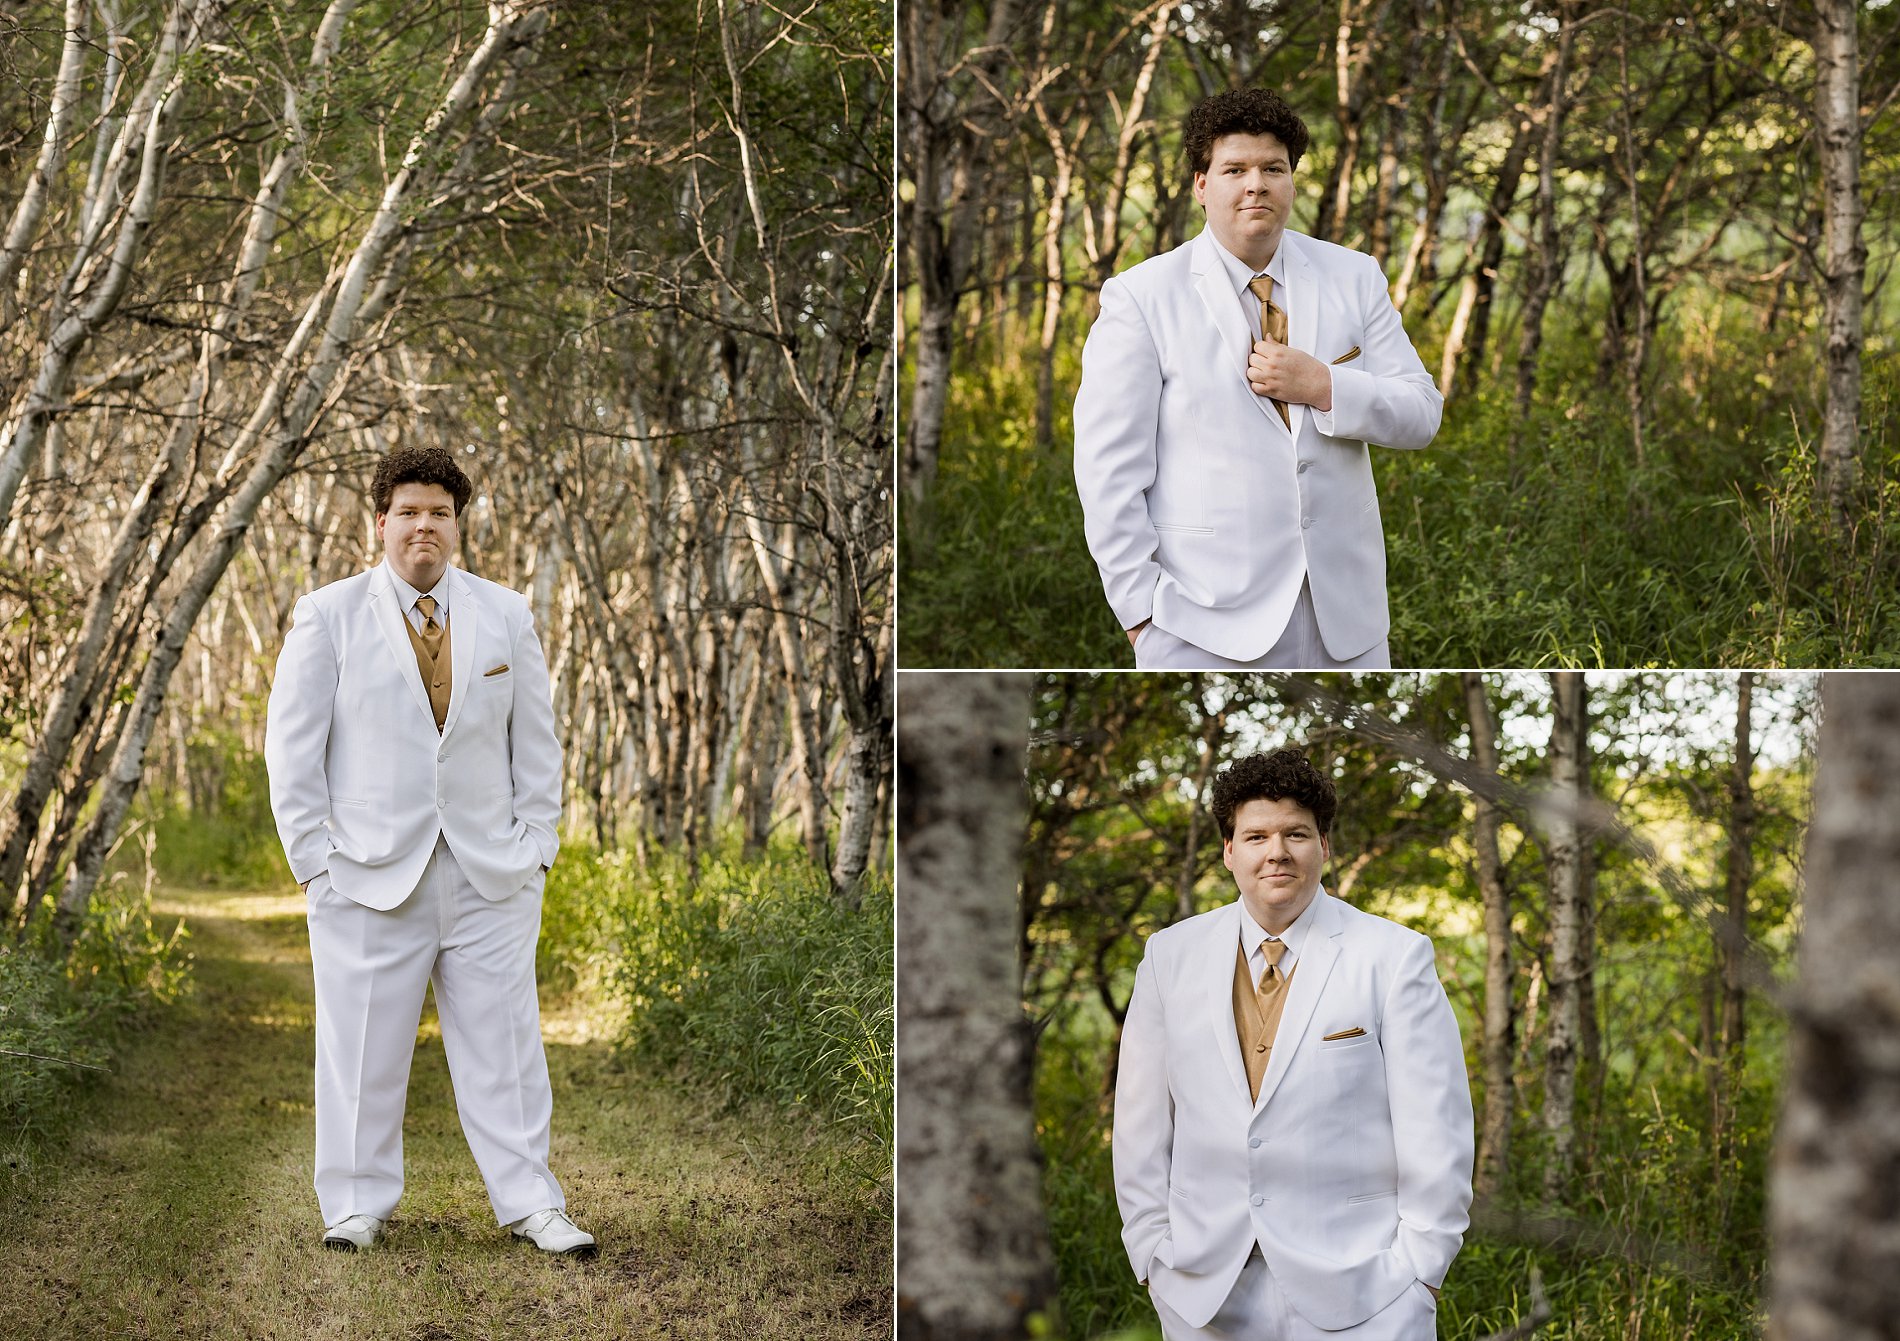 Delisle Composite High School graduate in a white suit with gold accessories, standing on a path in the trees.